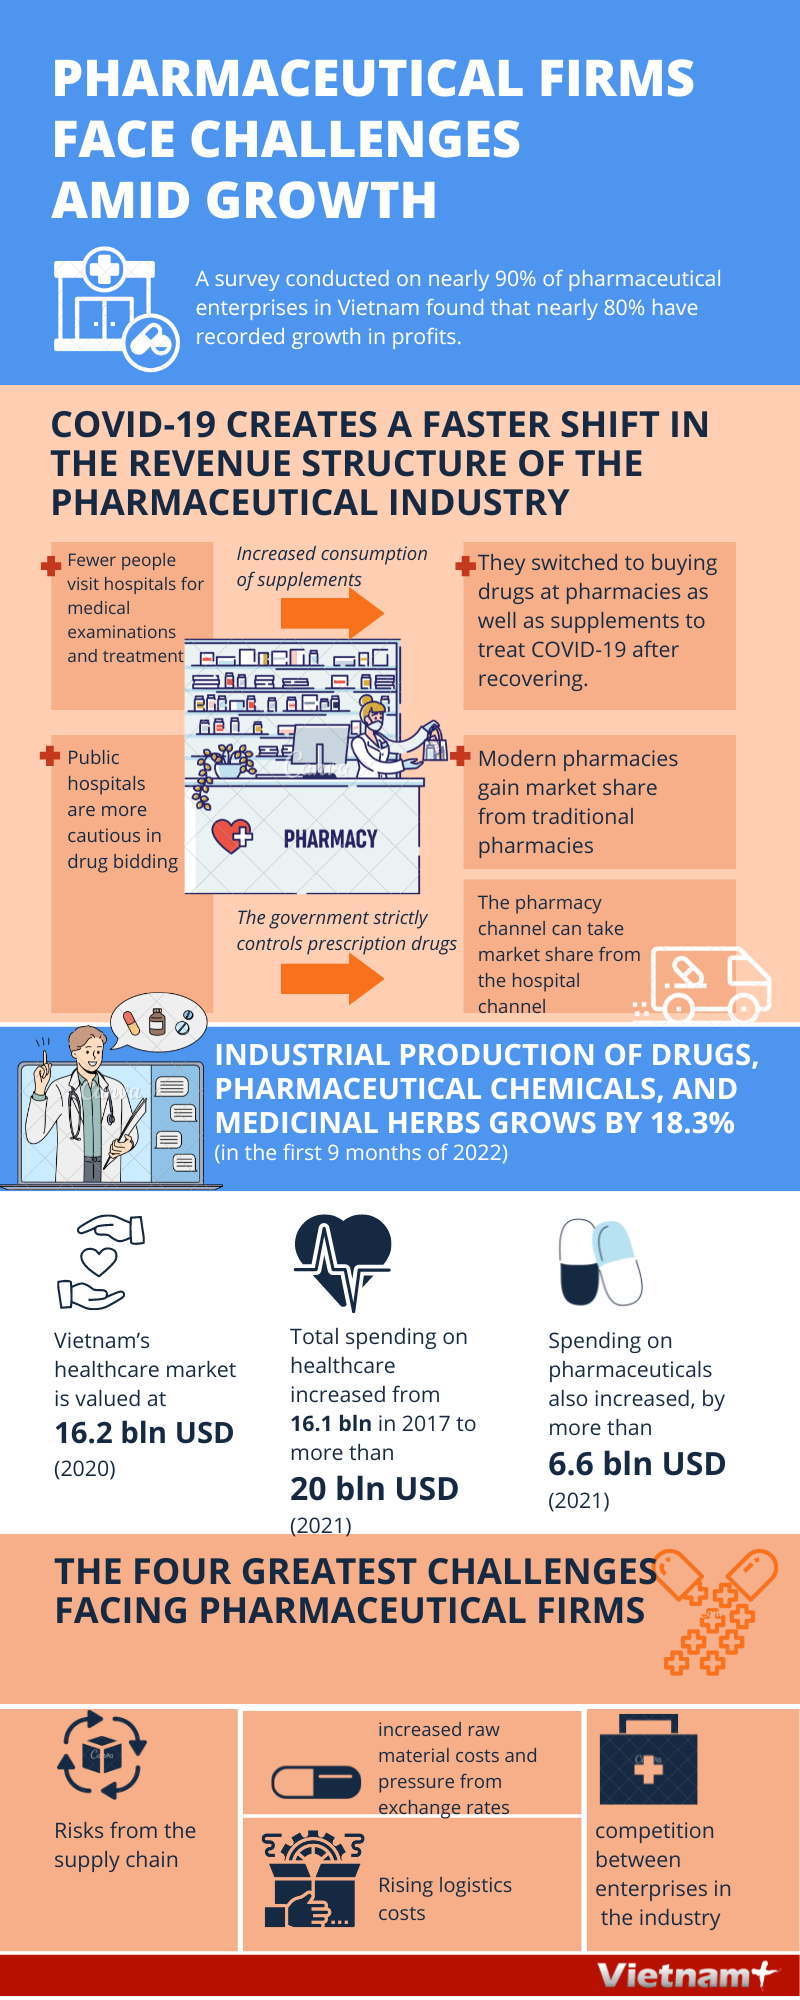 Pharmaceutical businesses face challenges amid growth hinh anh 1